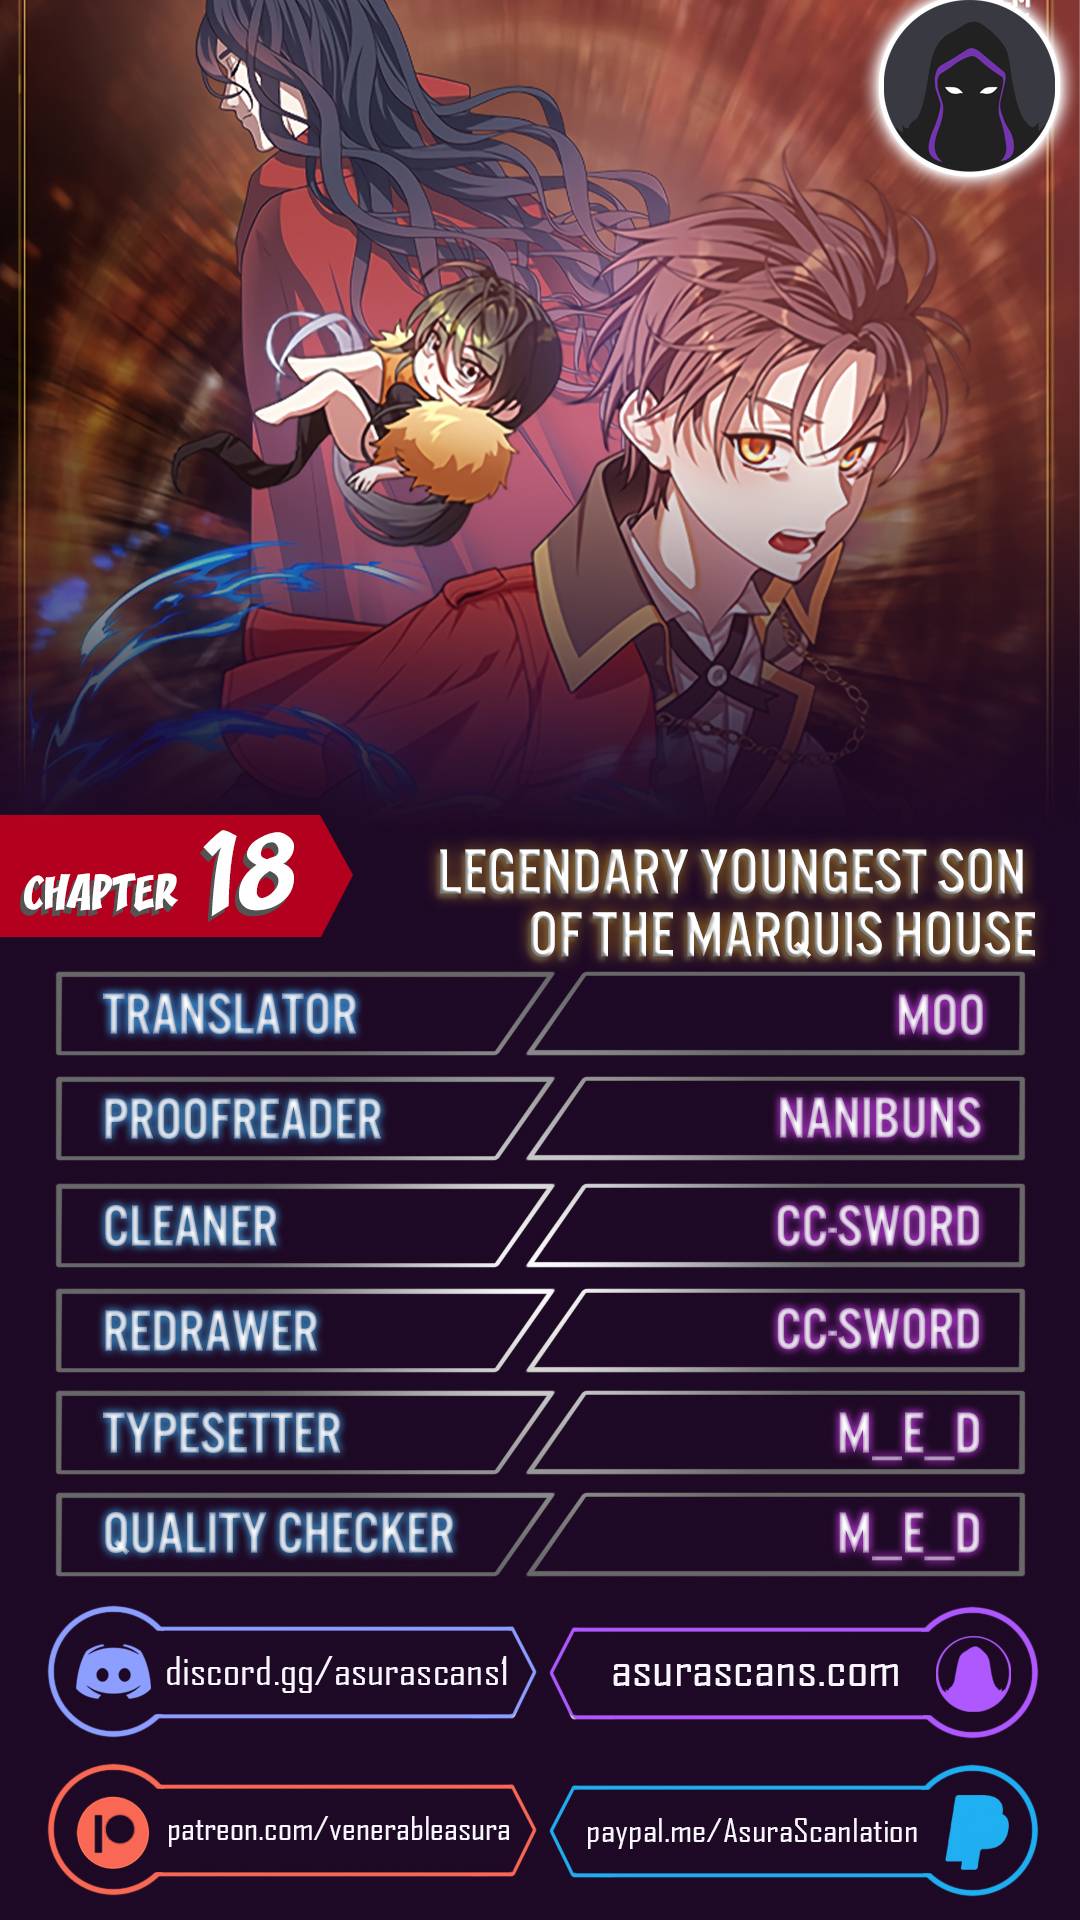 Legendary Youngest Son of the Marquis House chapter 18